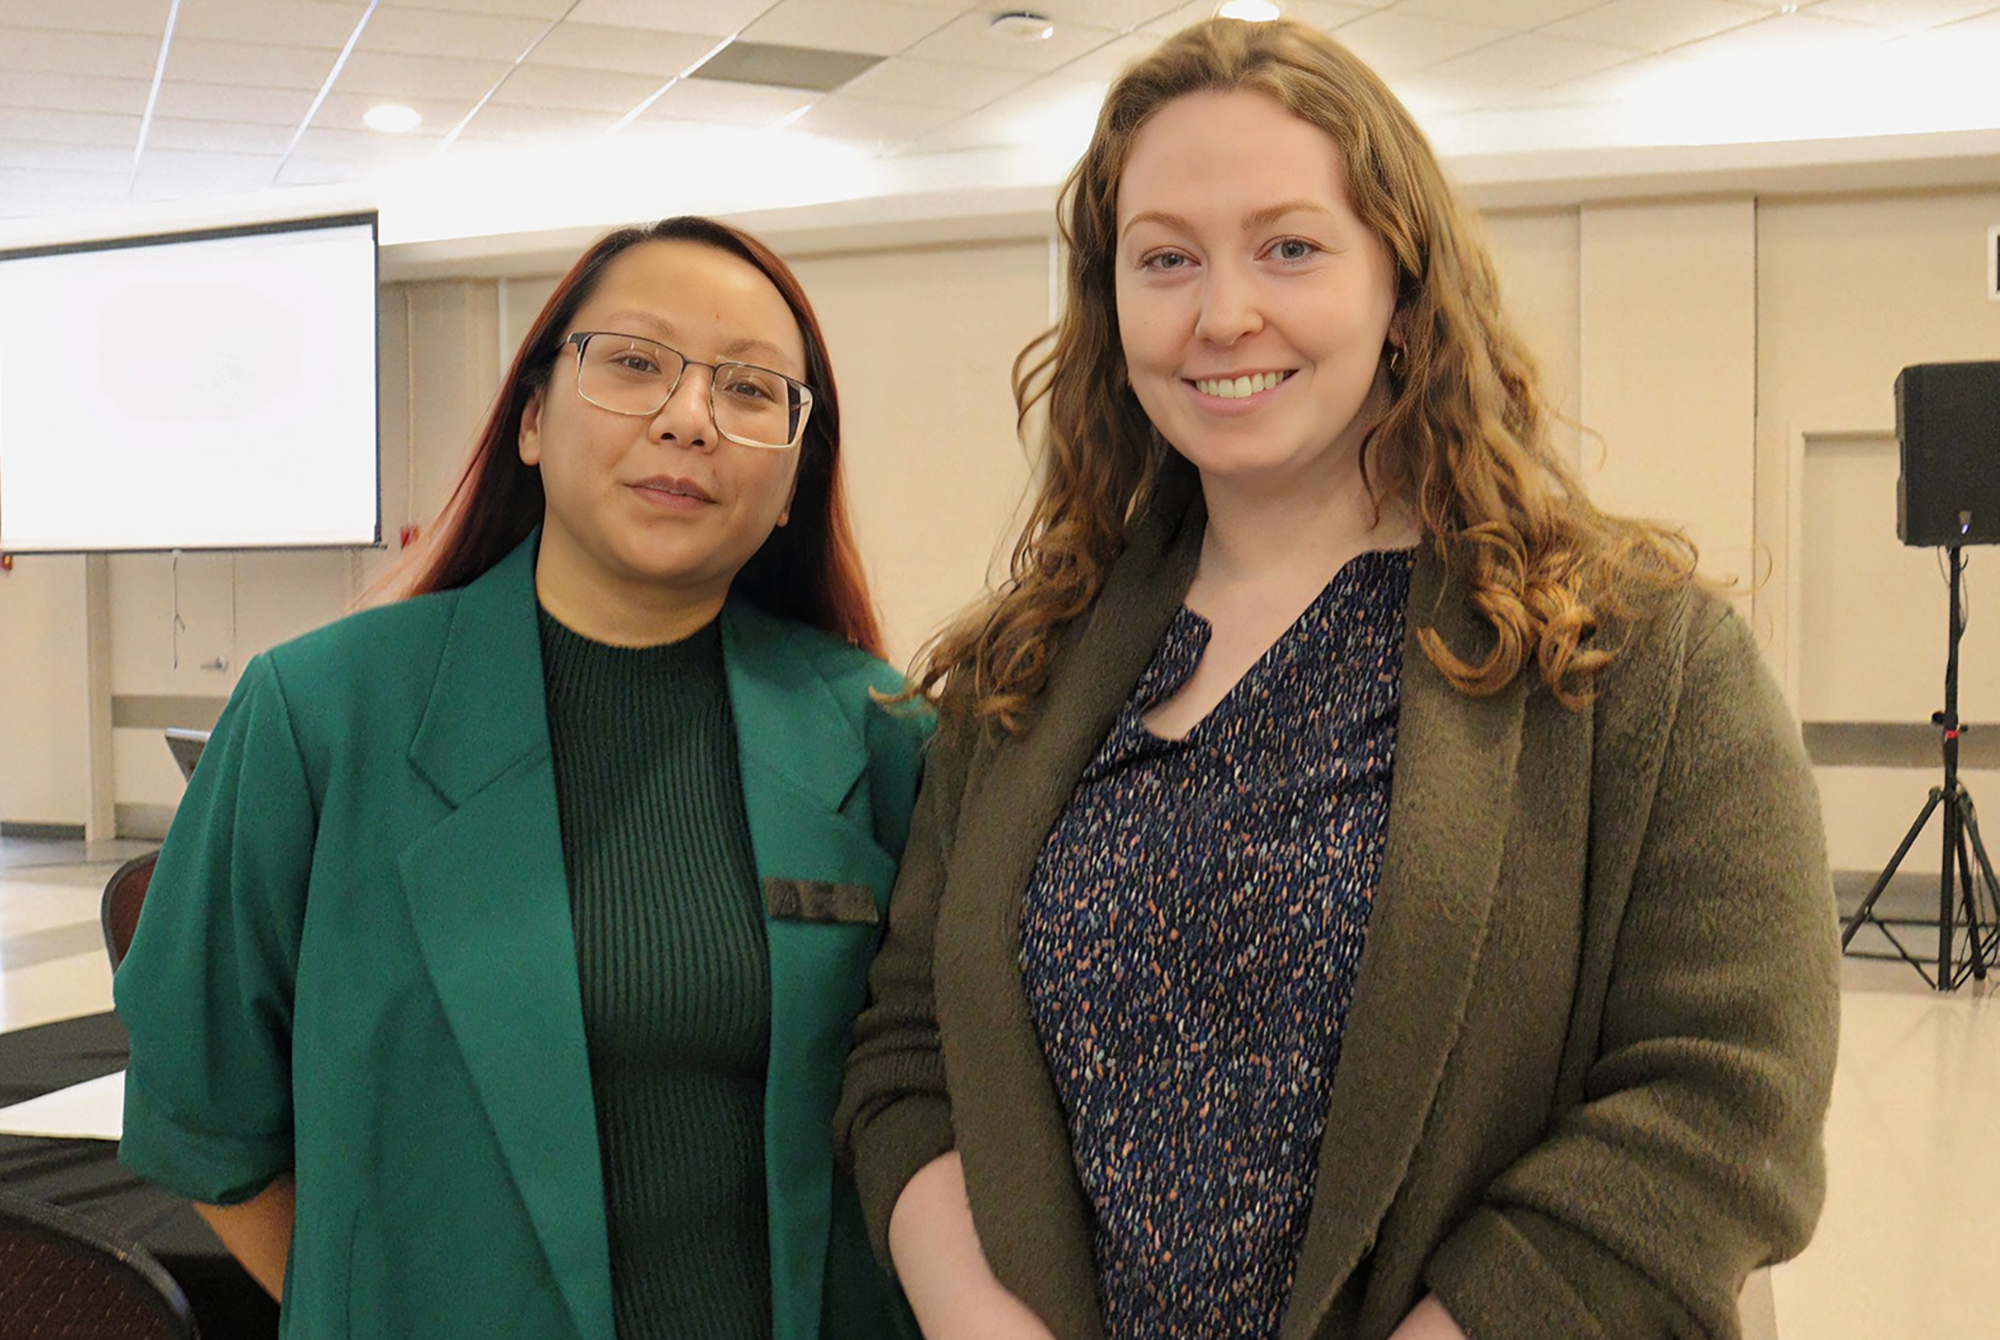 Sierra Lee and Niamh O'Shea, co-chairs of the International Student Advisory Committee, organized Algonquin College's first-ever International Student Town Hall, held on Feb. 28 in the D-building.